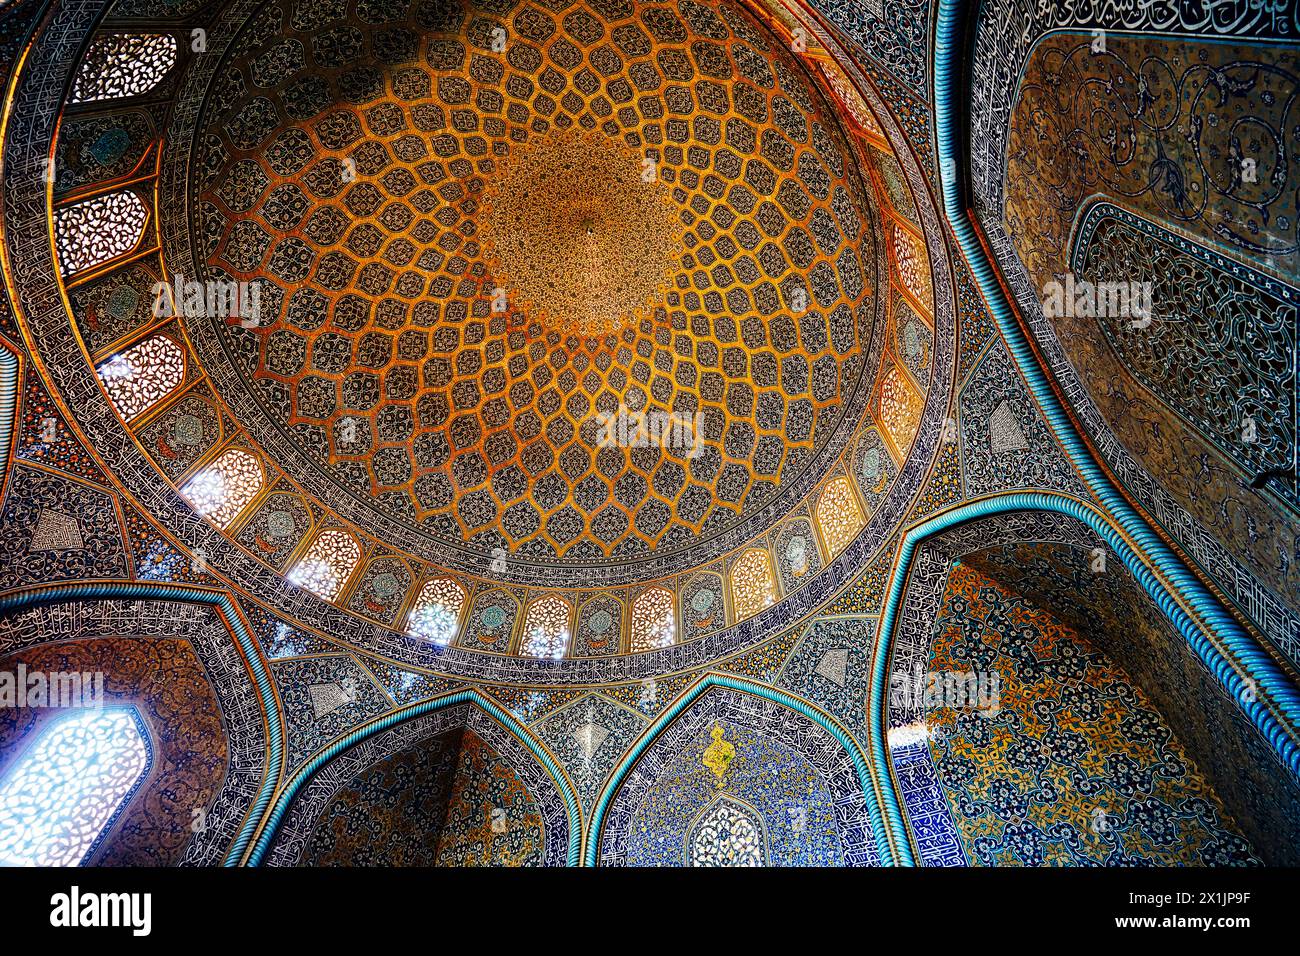 View from below of domed ceiling in the Shah Mosque (Masjed-e Shah) with its elaborate tiling. Isfahan, Iran. Stock Photo